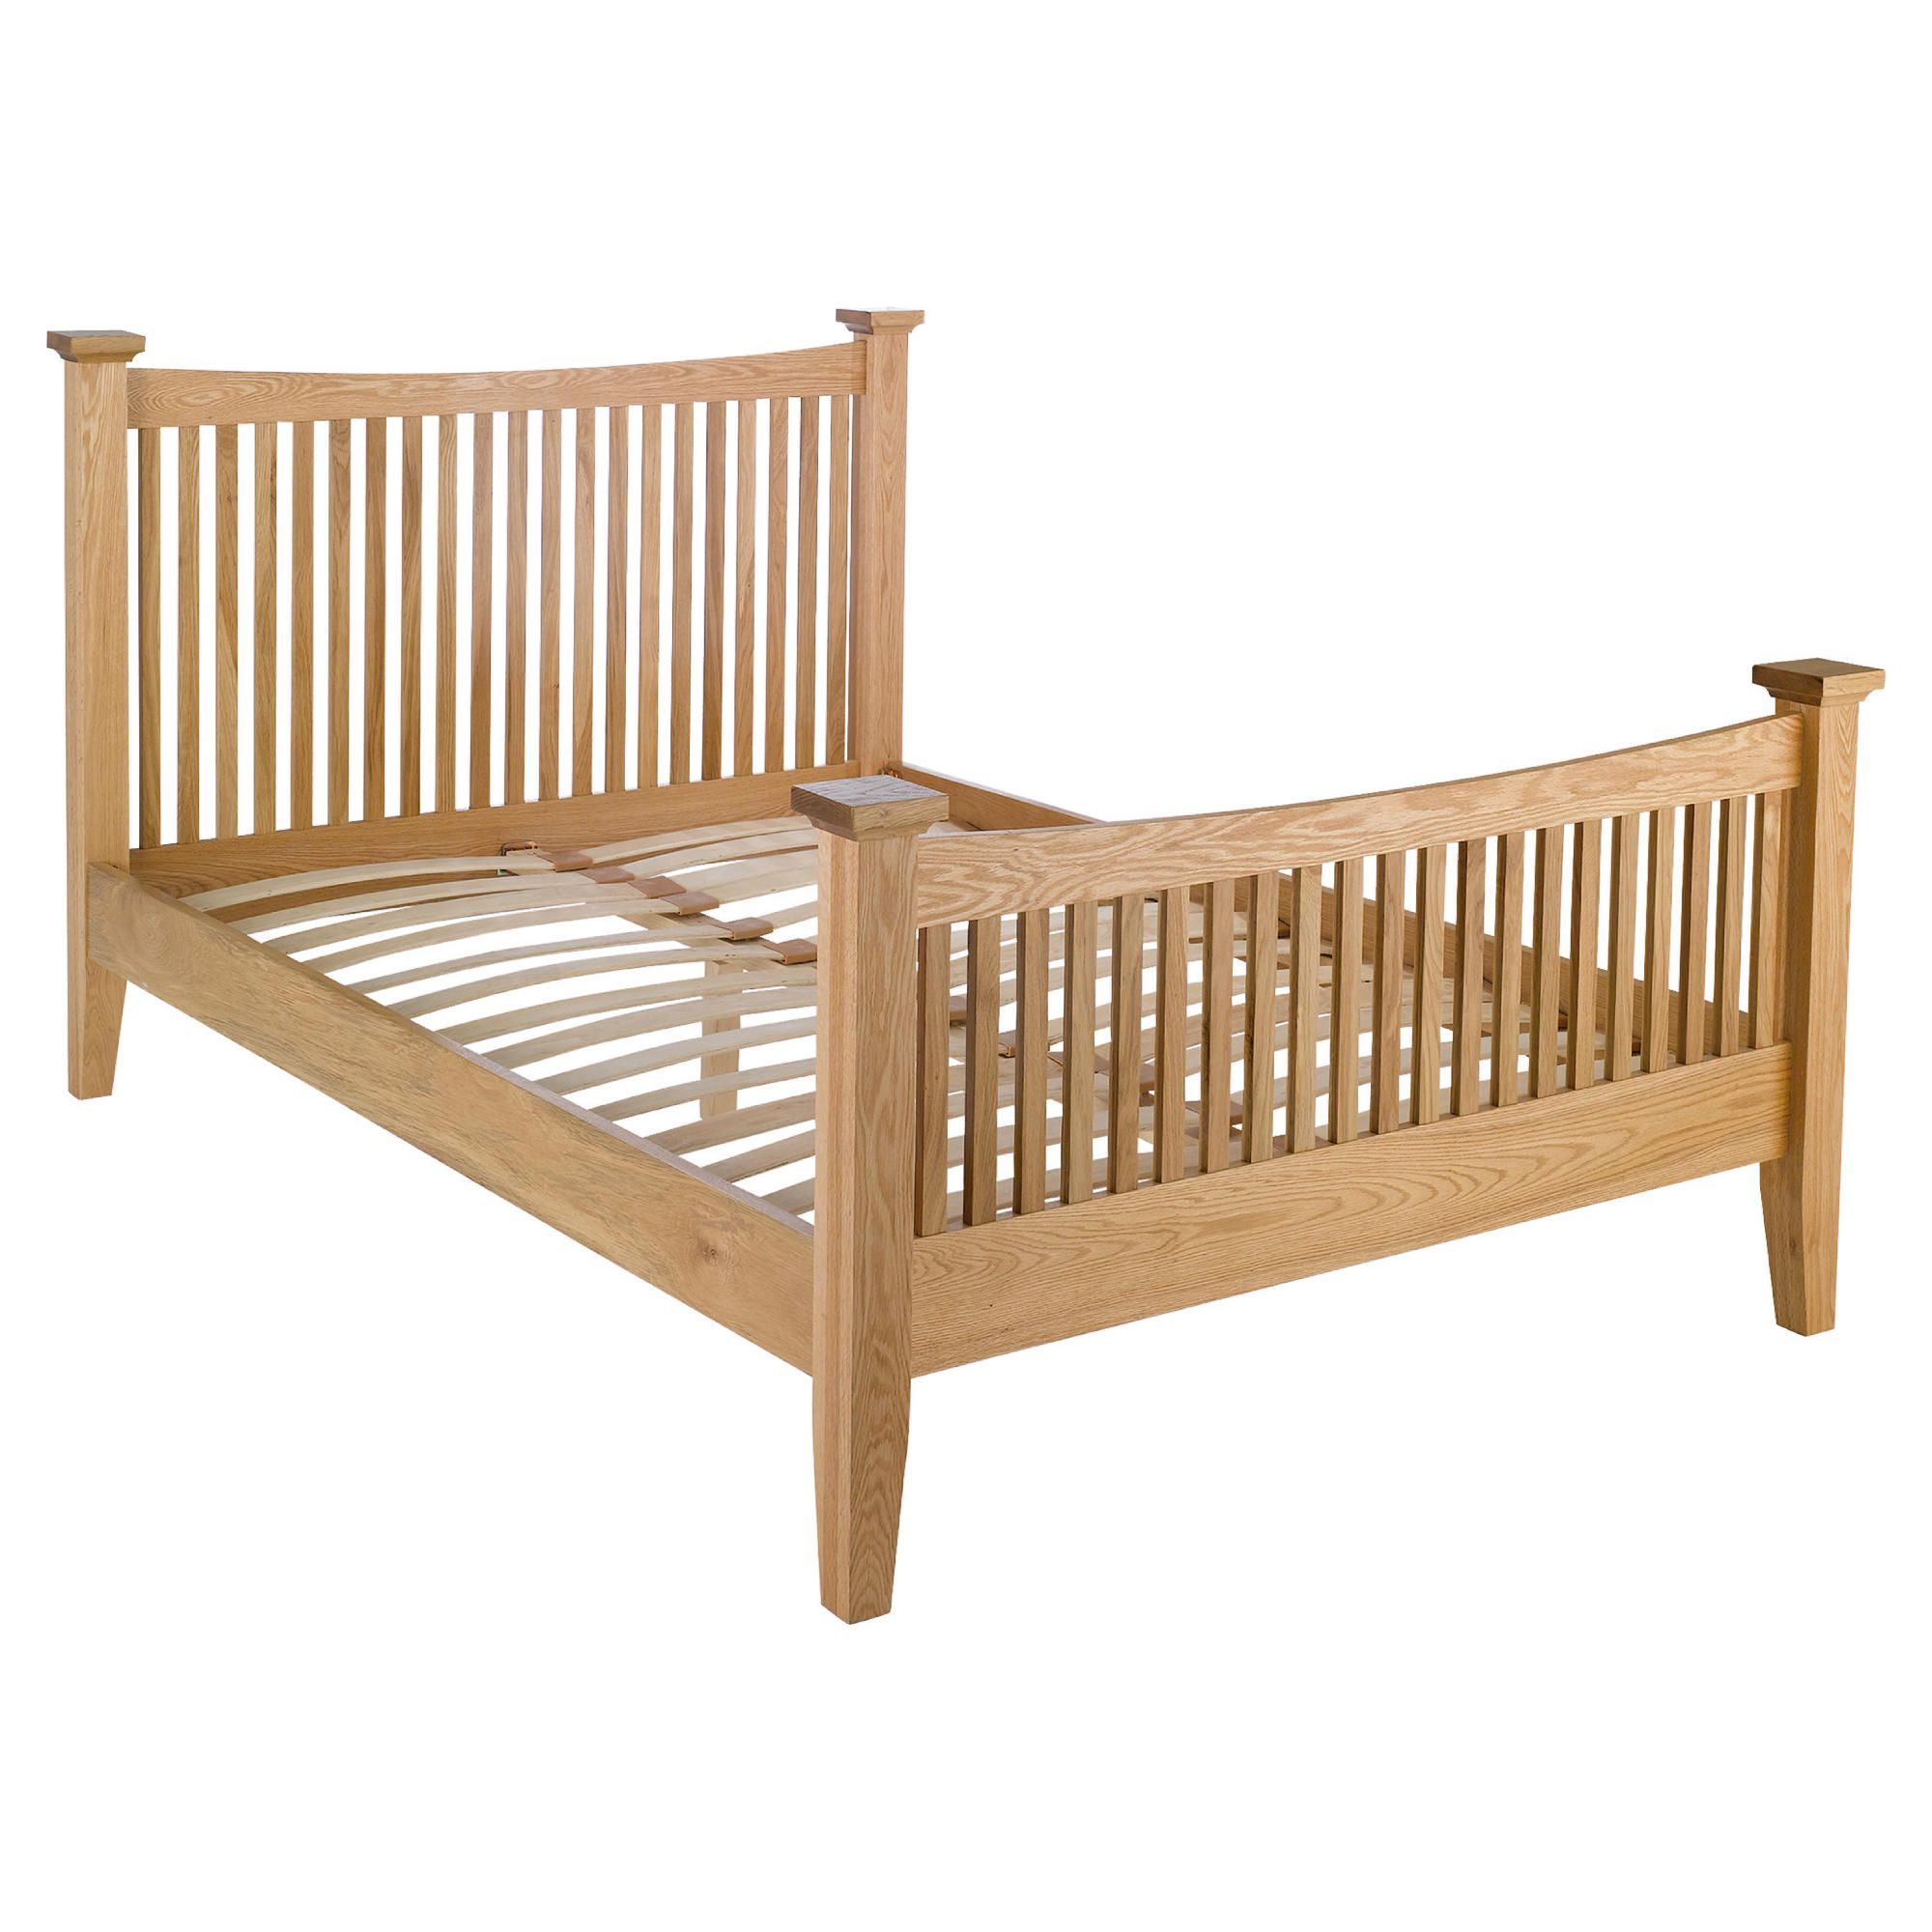 Hampstead Double Bed Frame, Oak at Tesco Direct